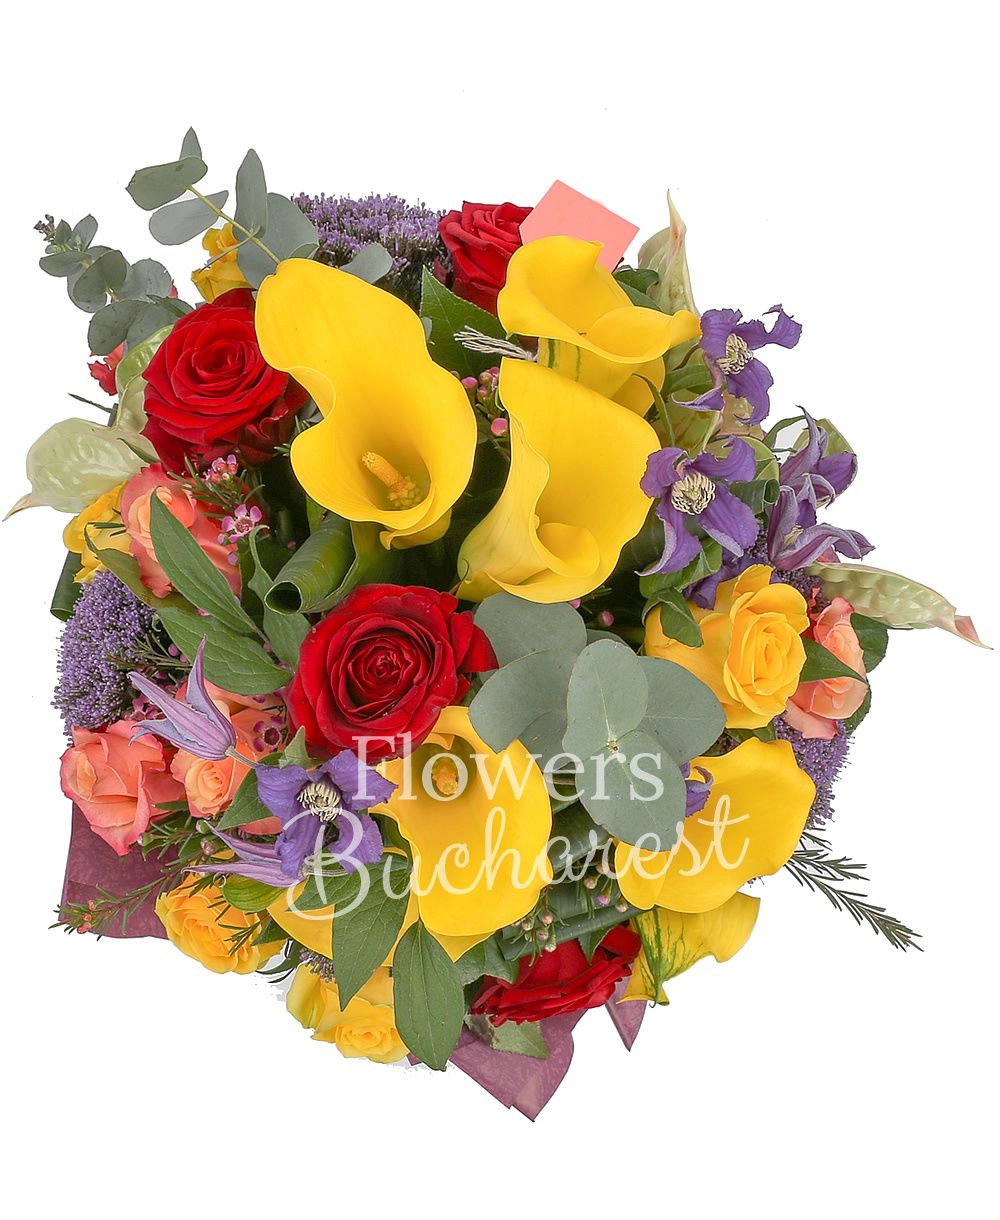 5 yellow cala, 4 red roses, 5 yellow roses, 3 orange roses, 3 clematis, 2 green anthurium, 2 pink waxflower, 3 mauve trachelium, greenery